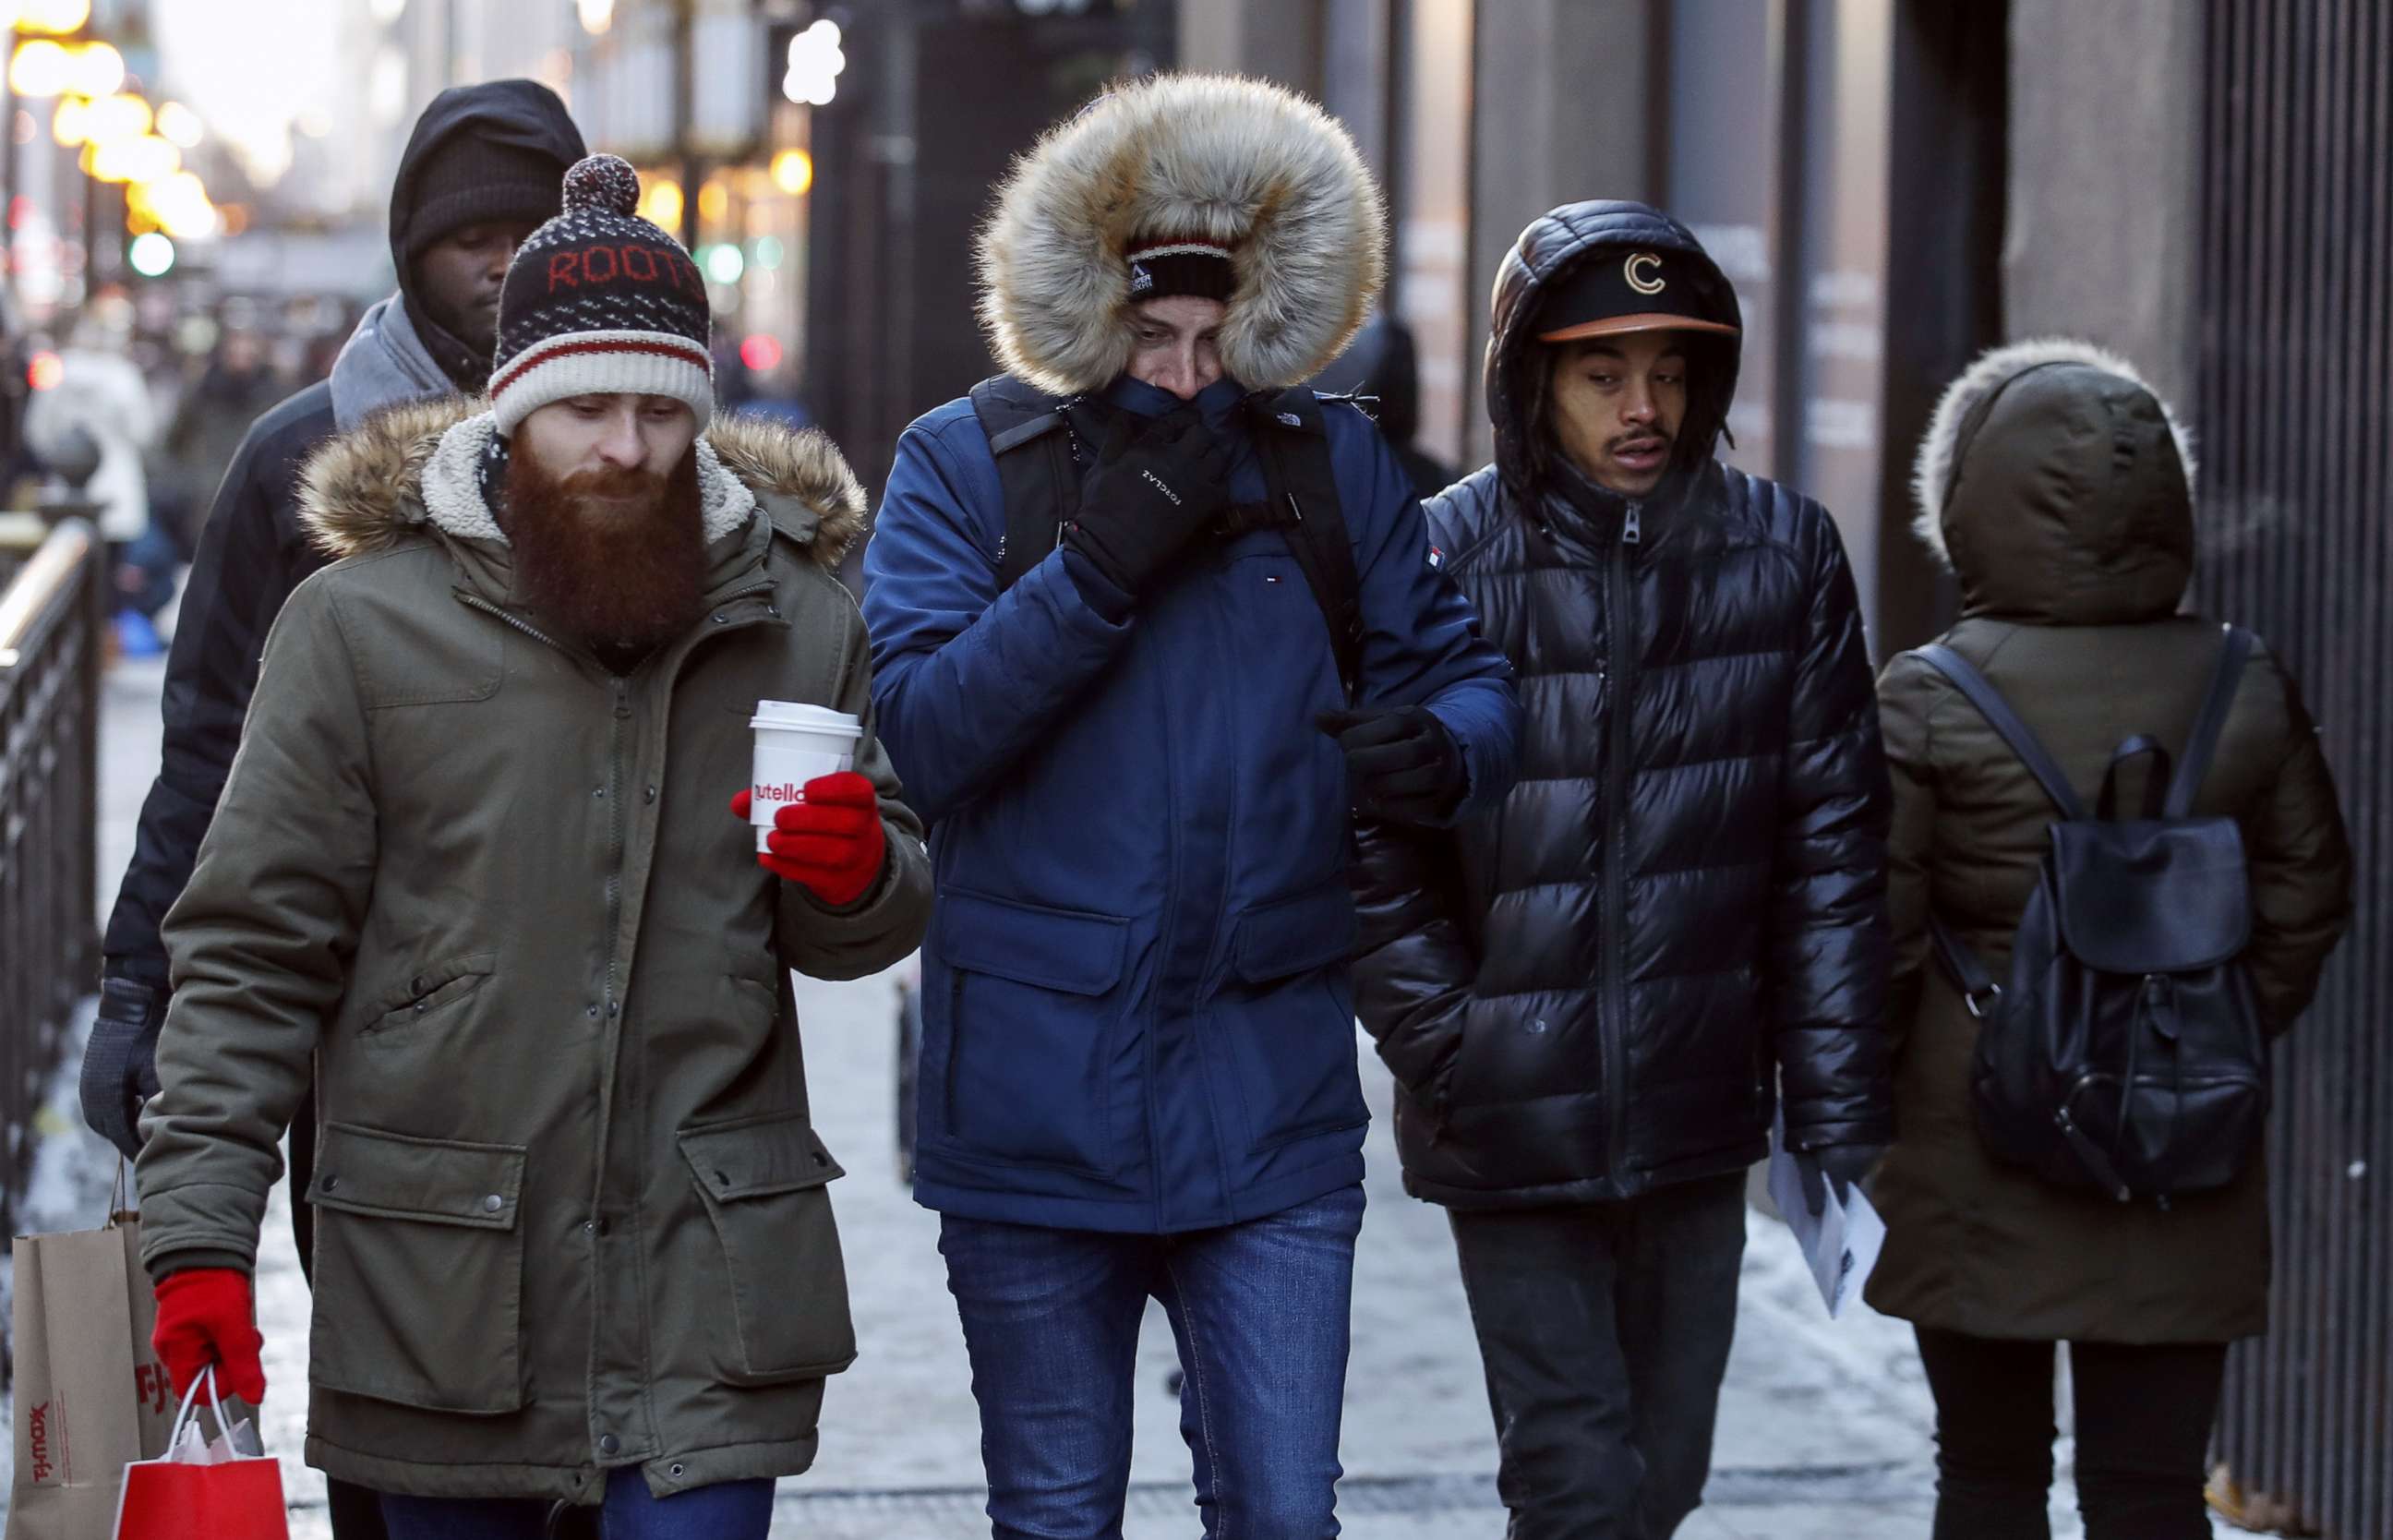 PHOTO: Pedestrians walk along Michigan Avenue in Chicago, Dec. 27, 2017. Frigid temperatures are expected in the single digits in the midwest over the next few days.  